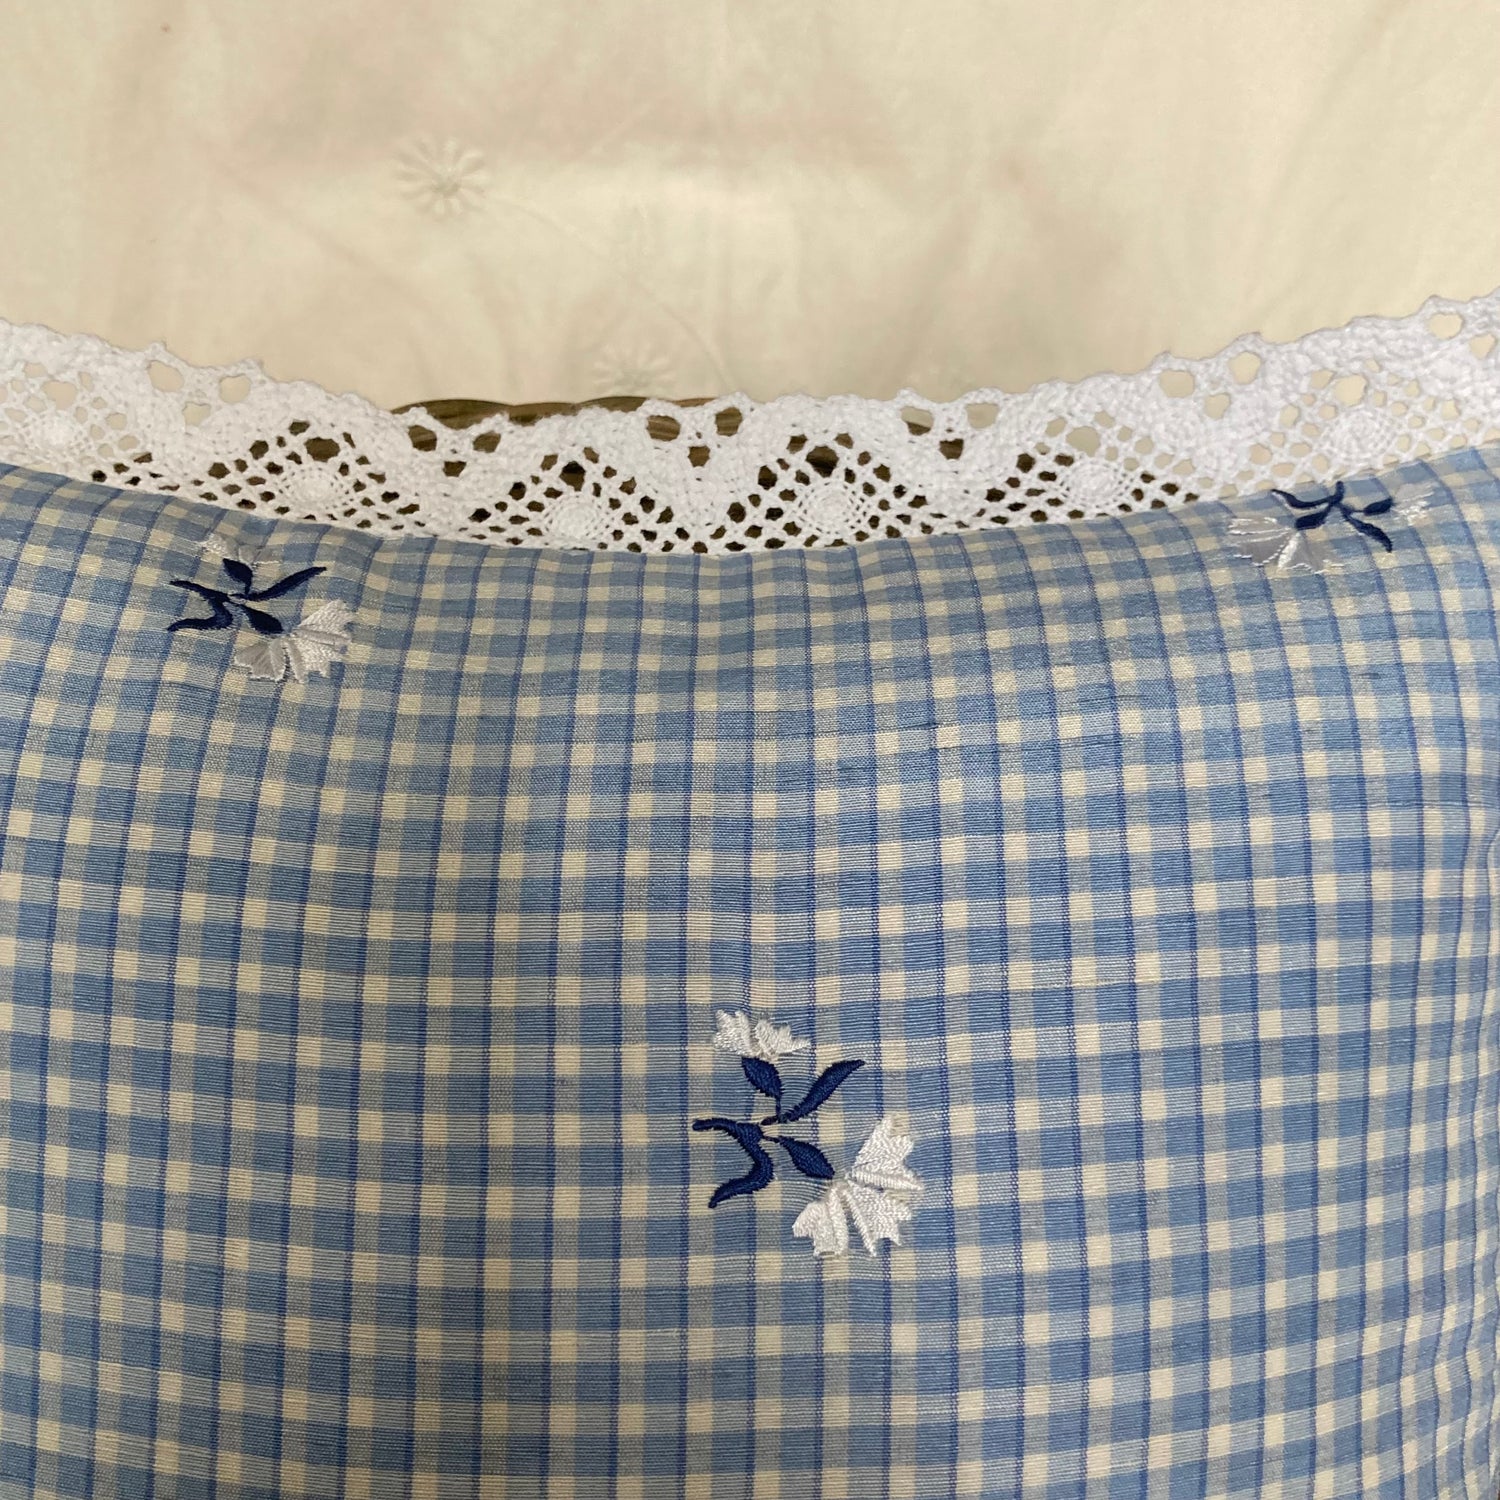 Nursery Rhymes Gingham Blue 13 x 13 Square Decorative Pillow Back with Down Feather Insert